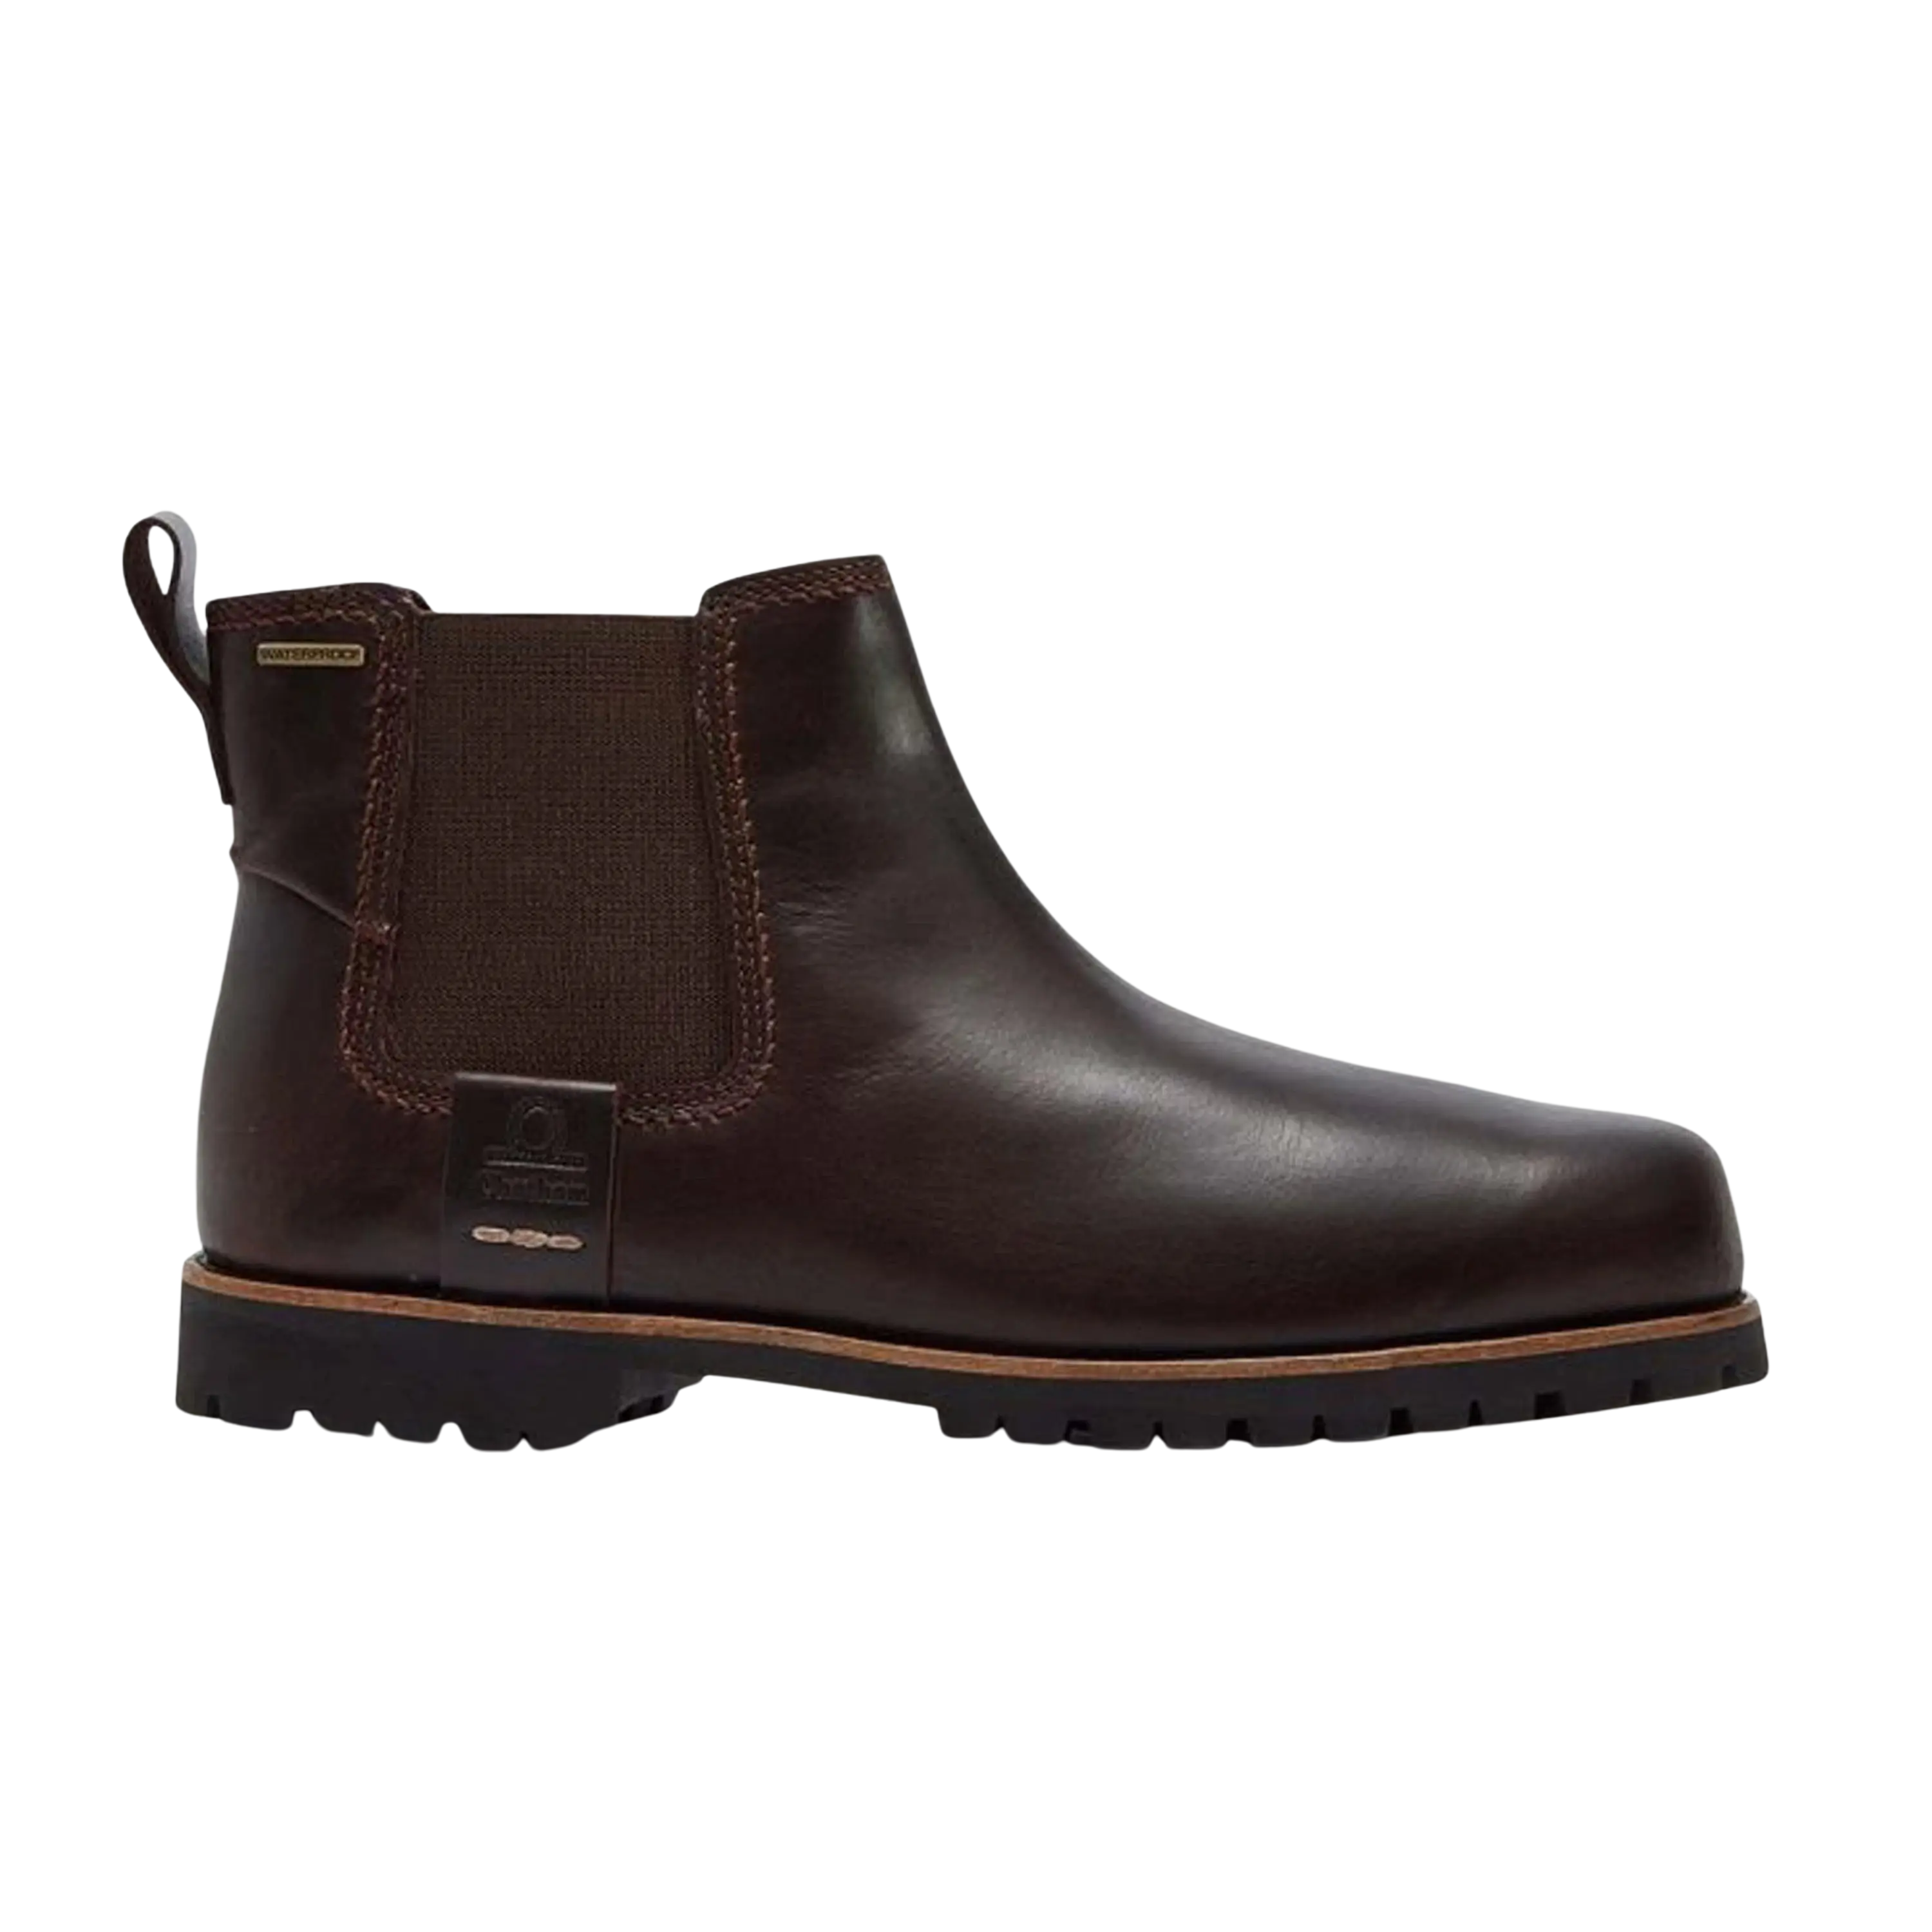 Chatham Southill Waterproof Leather Chelsea Boot for Men